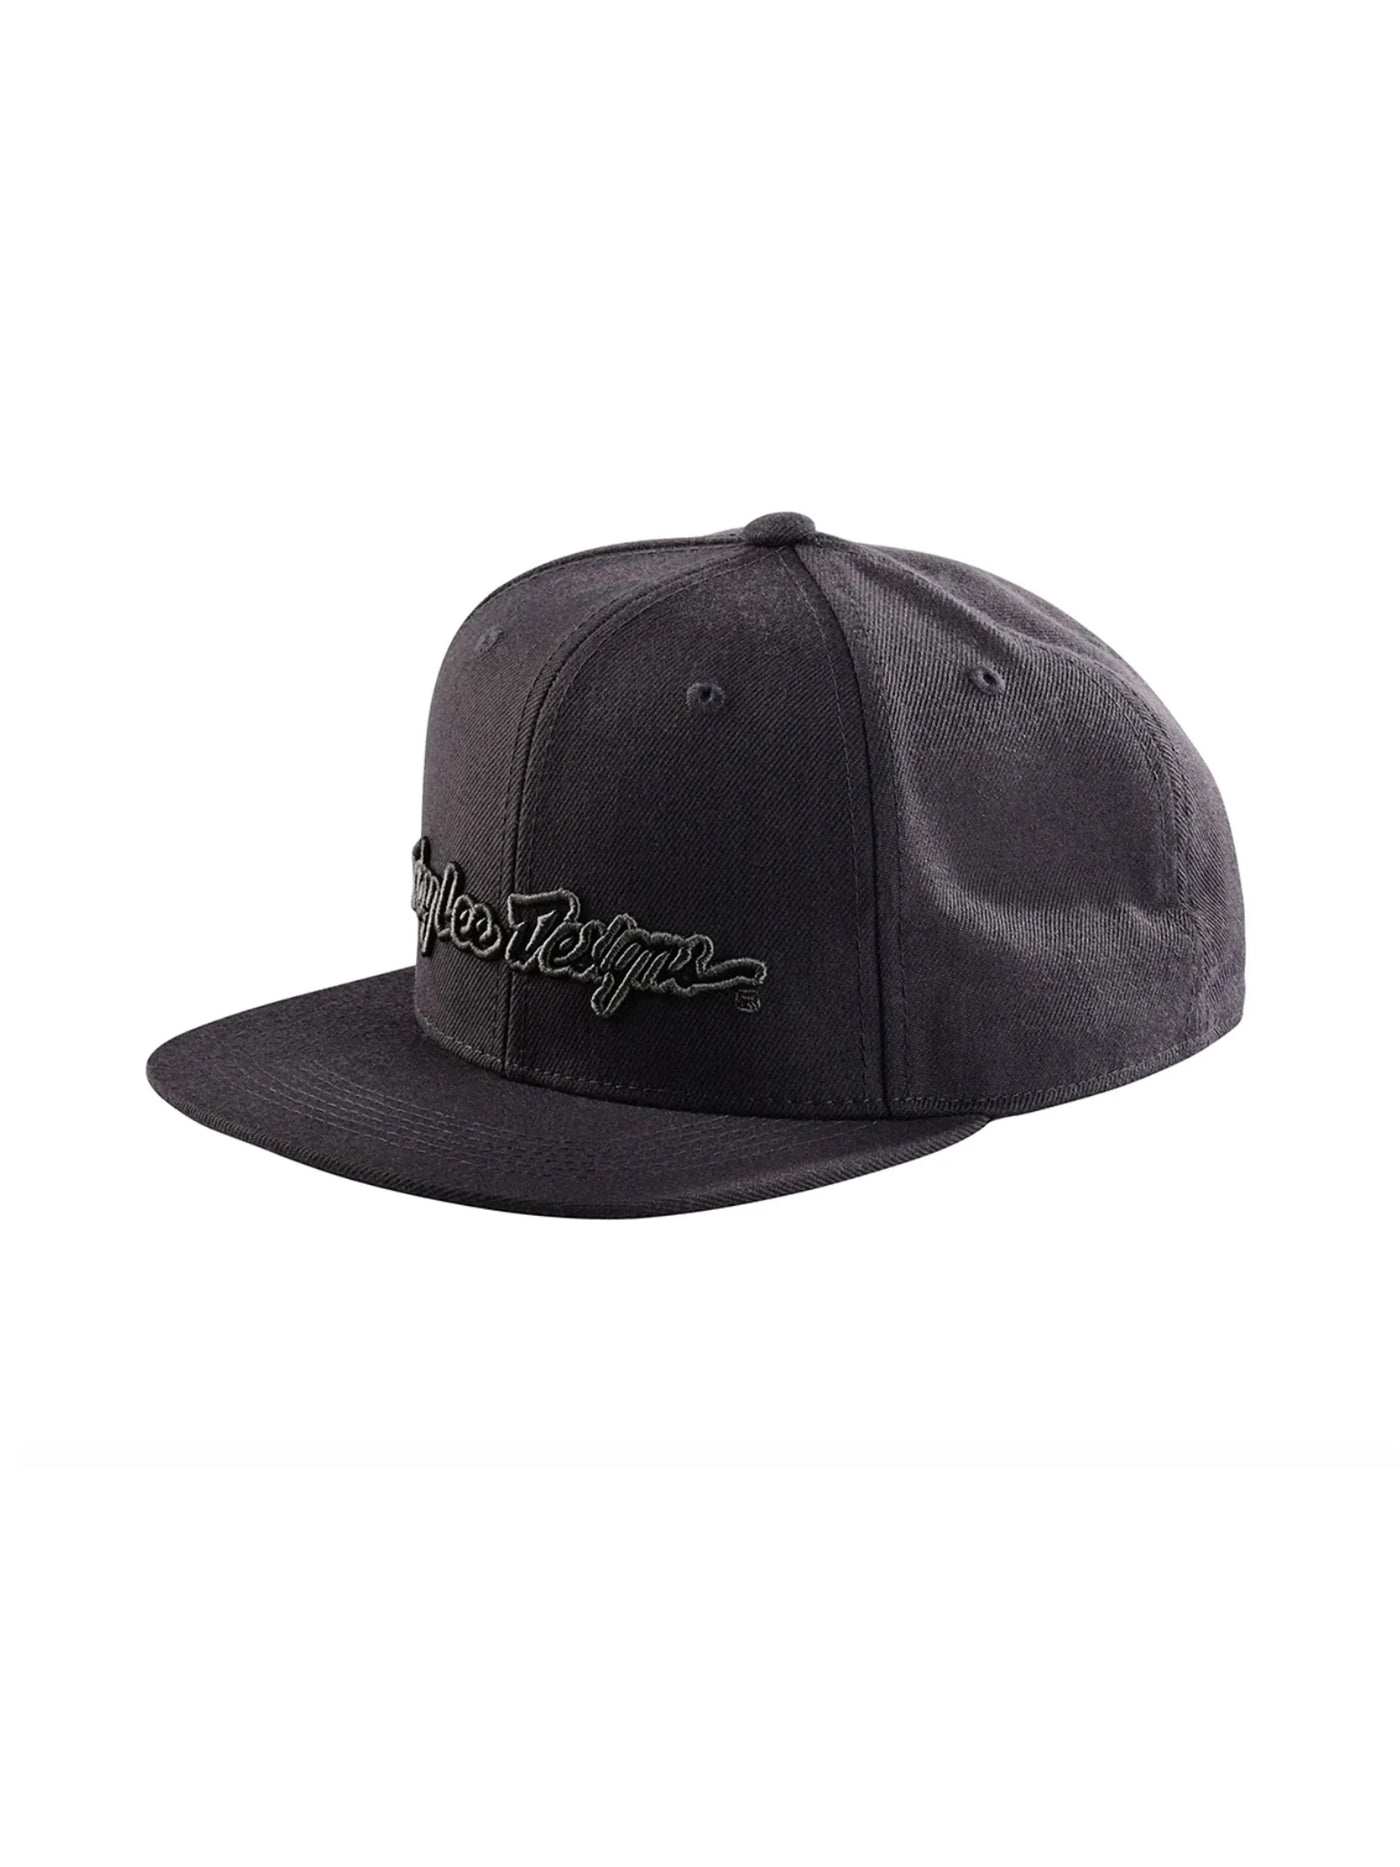 Jockey Troy Lee Designs 9Fifty Snapack Signature Gris / Gris Oscuro